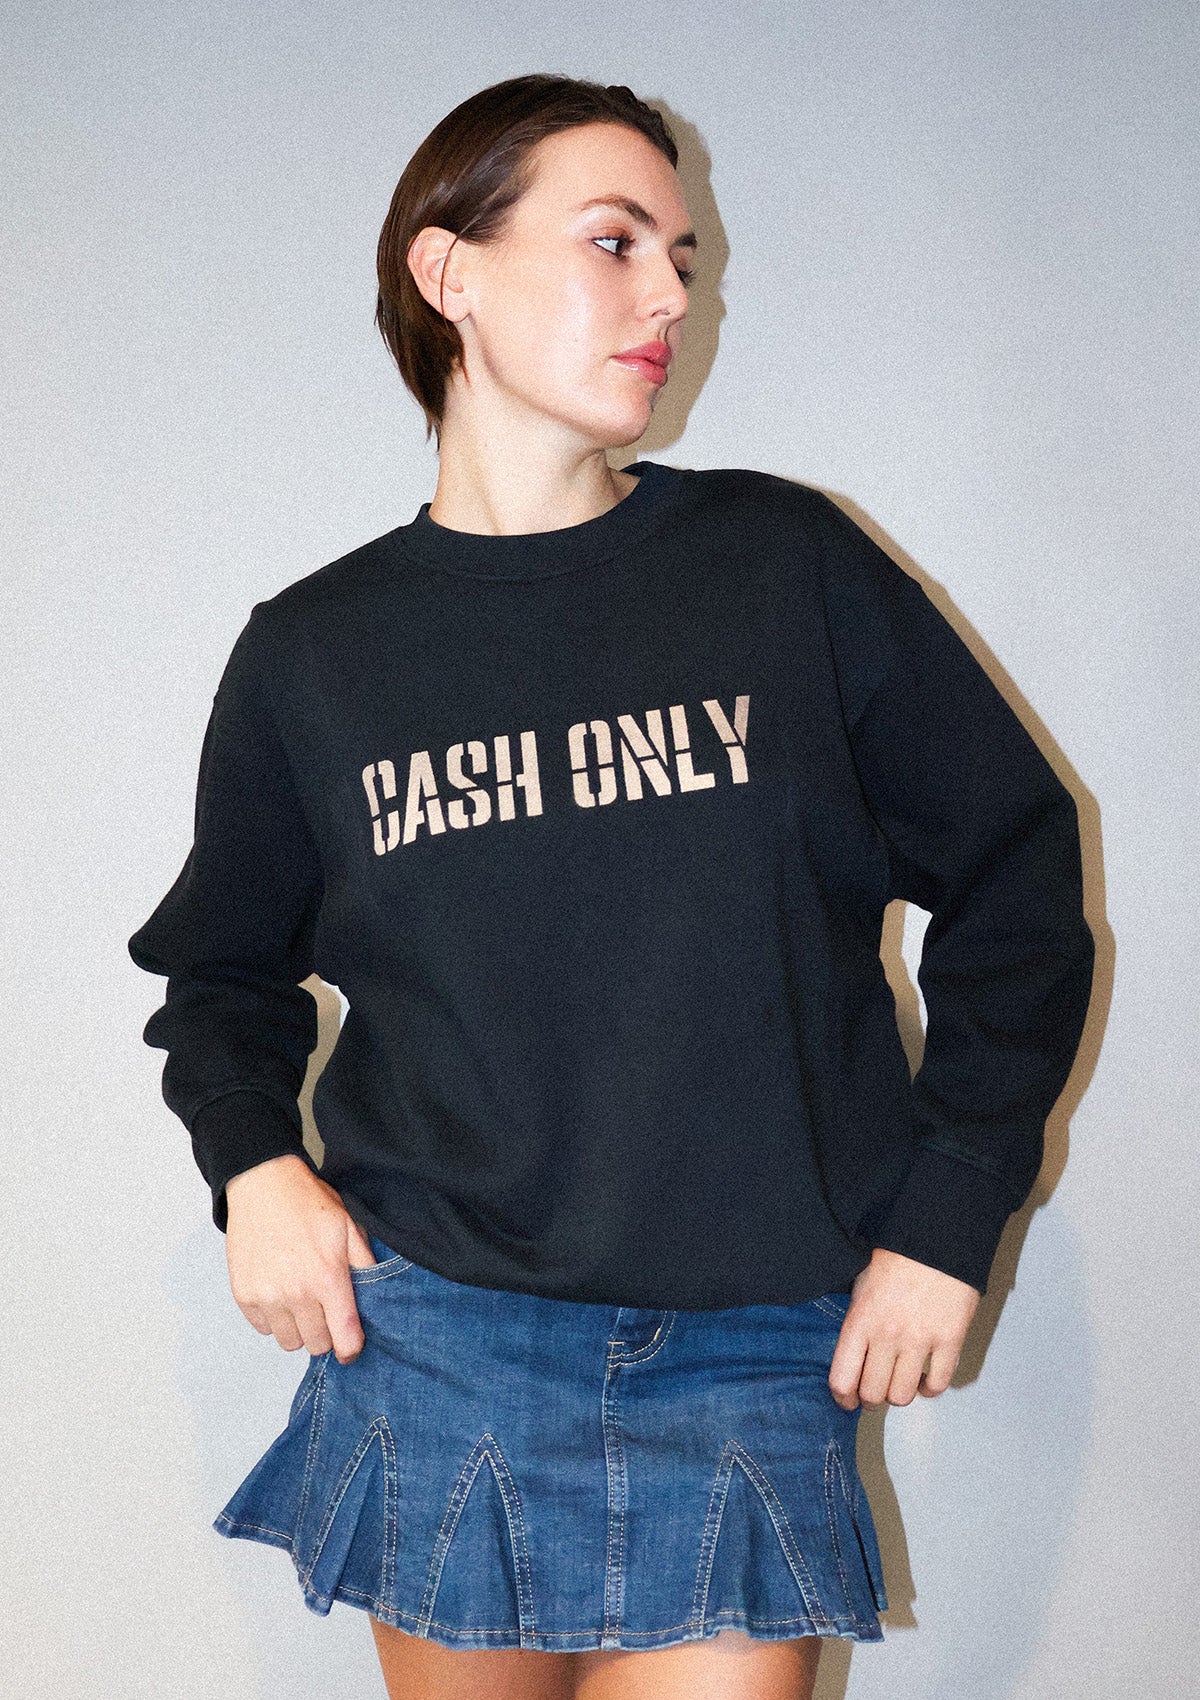 Andy Cash Only Sweater